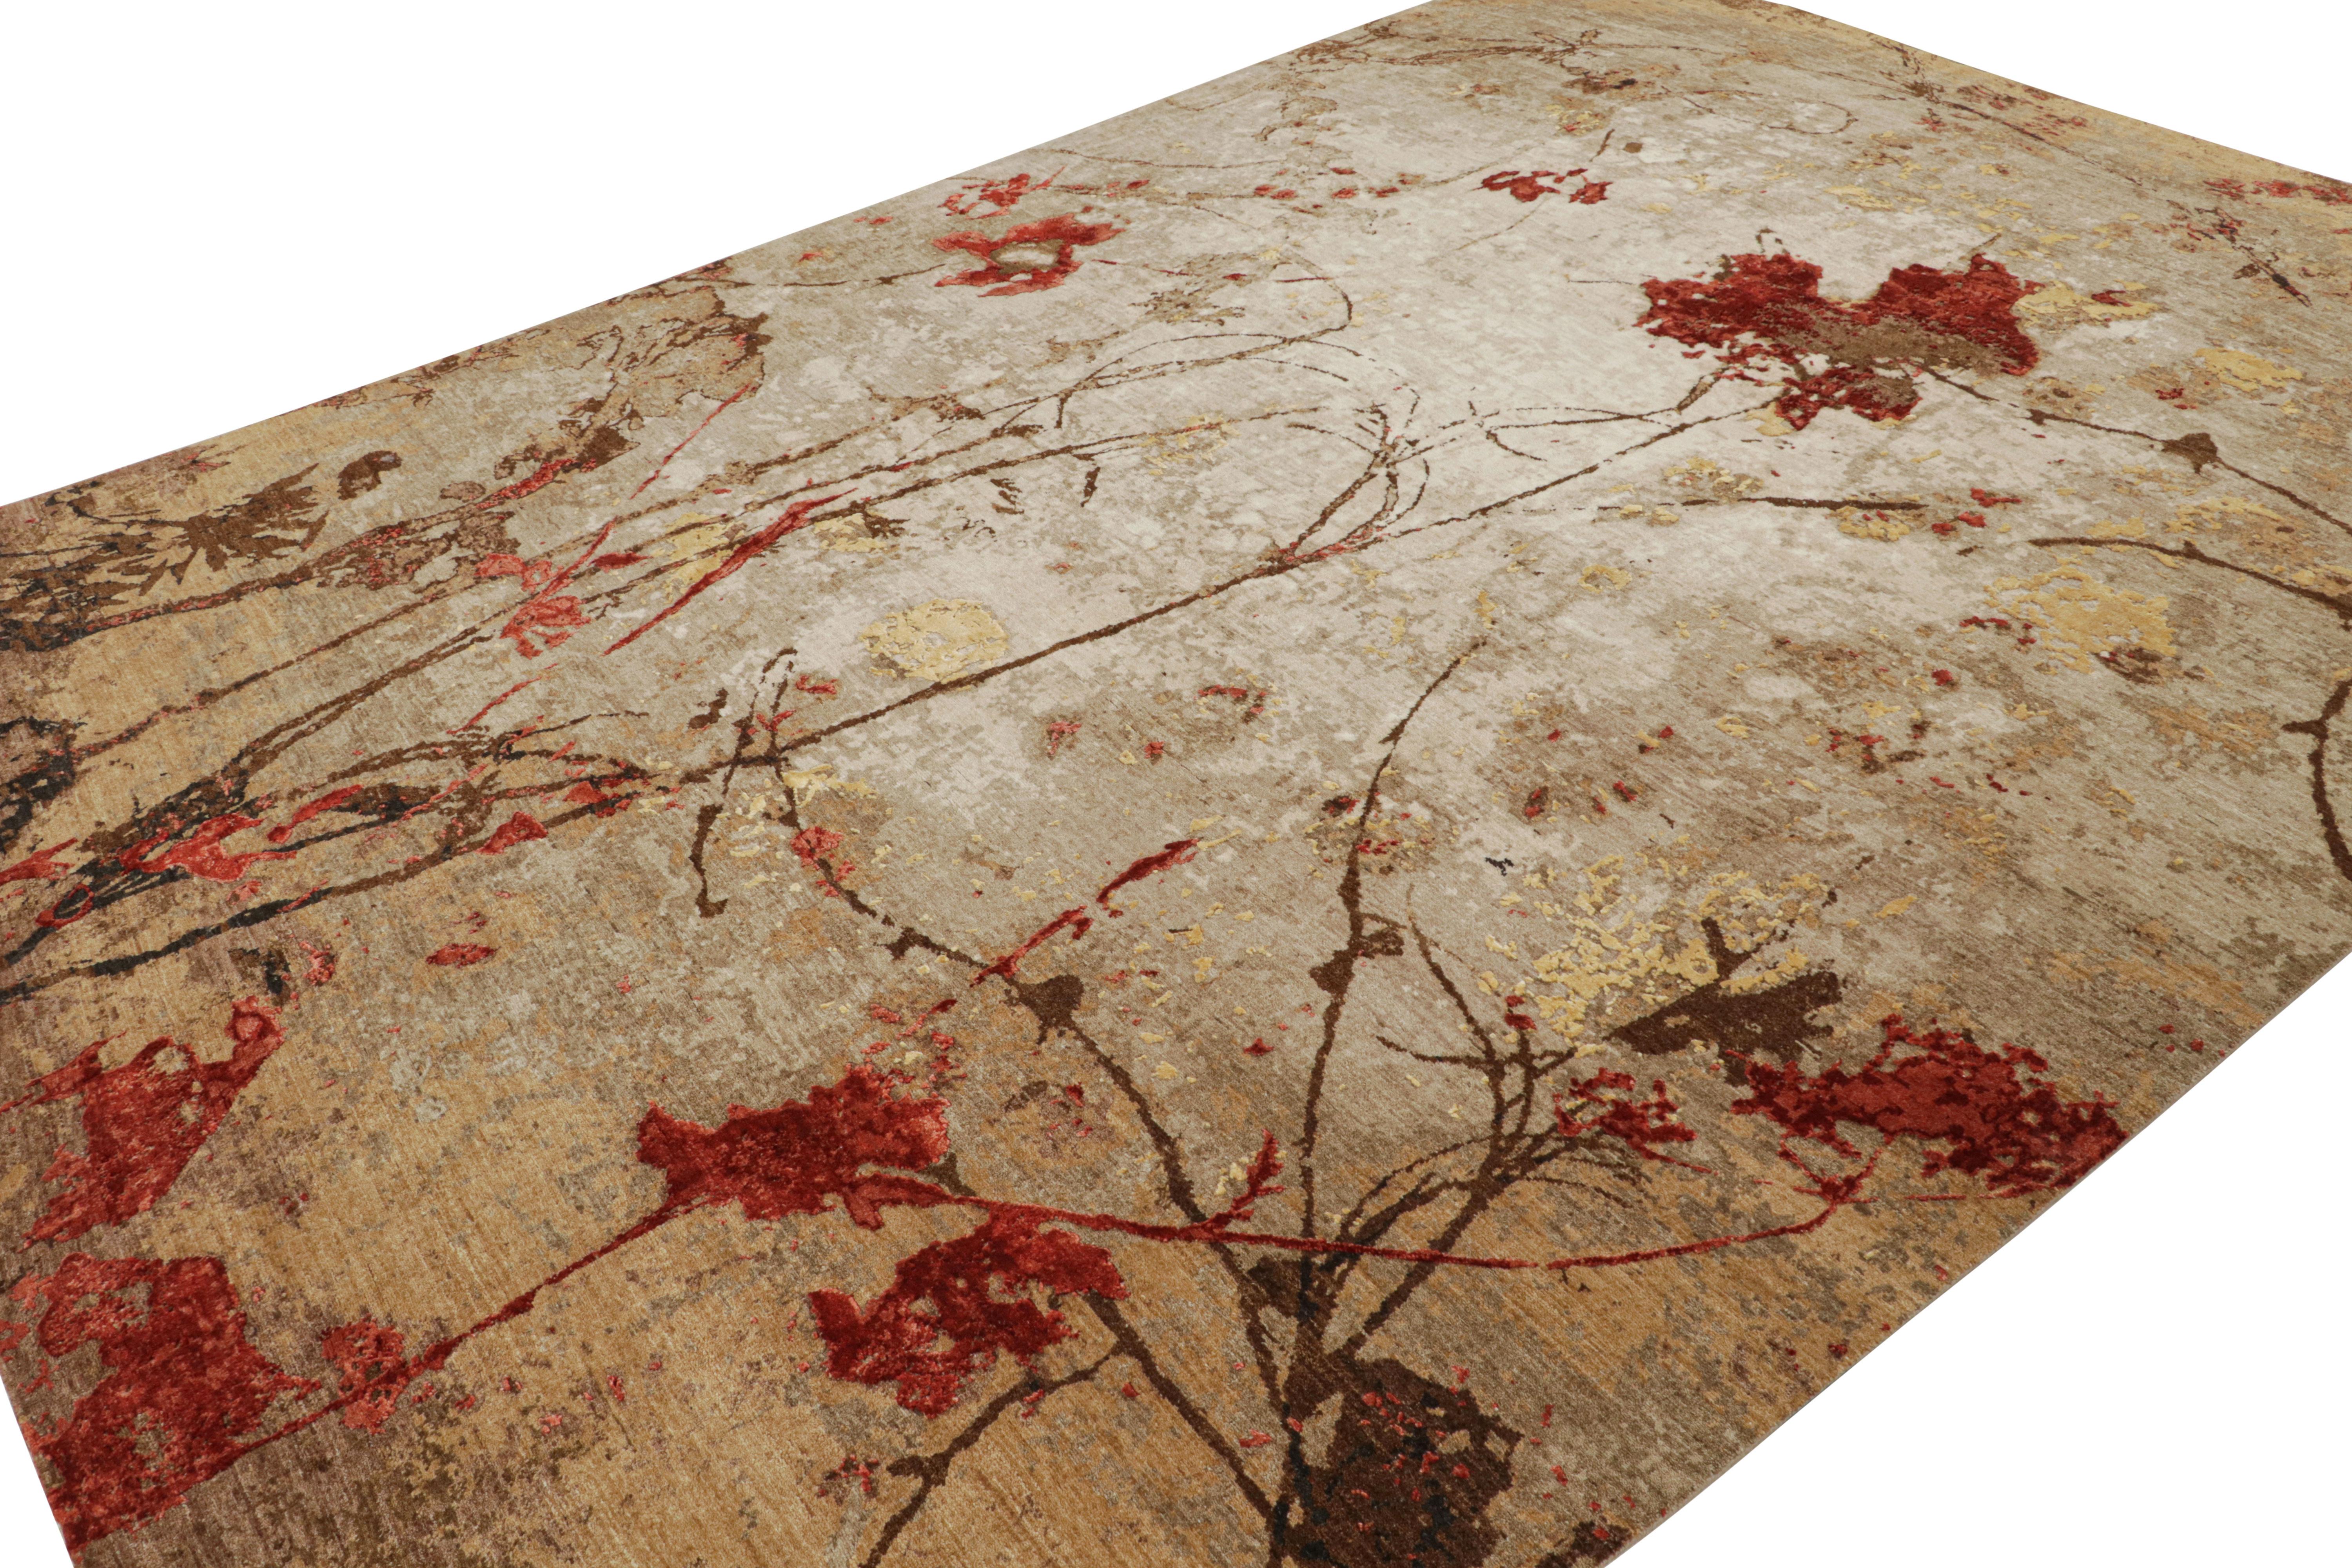 Representing one of our finest new qualities of art and durability alike, this 9x12 piece is a contemporary impressionist rug from Rug & Kilim - all hand-knotted in wool and silk.

On the Design:

In this rug, rich brown and red underscore an